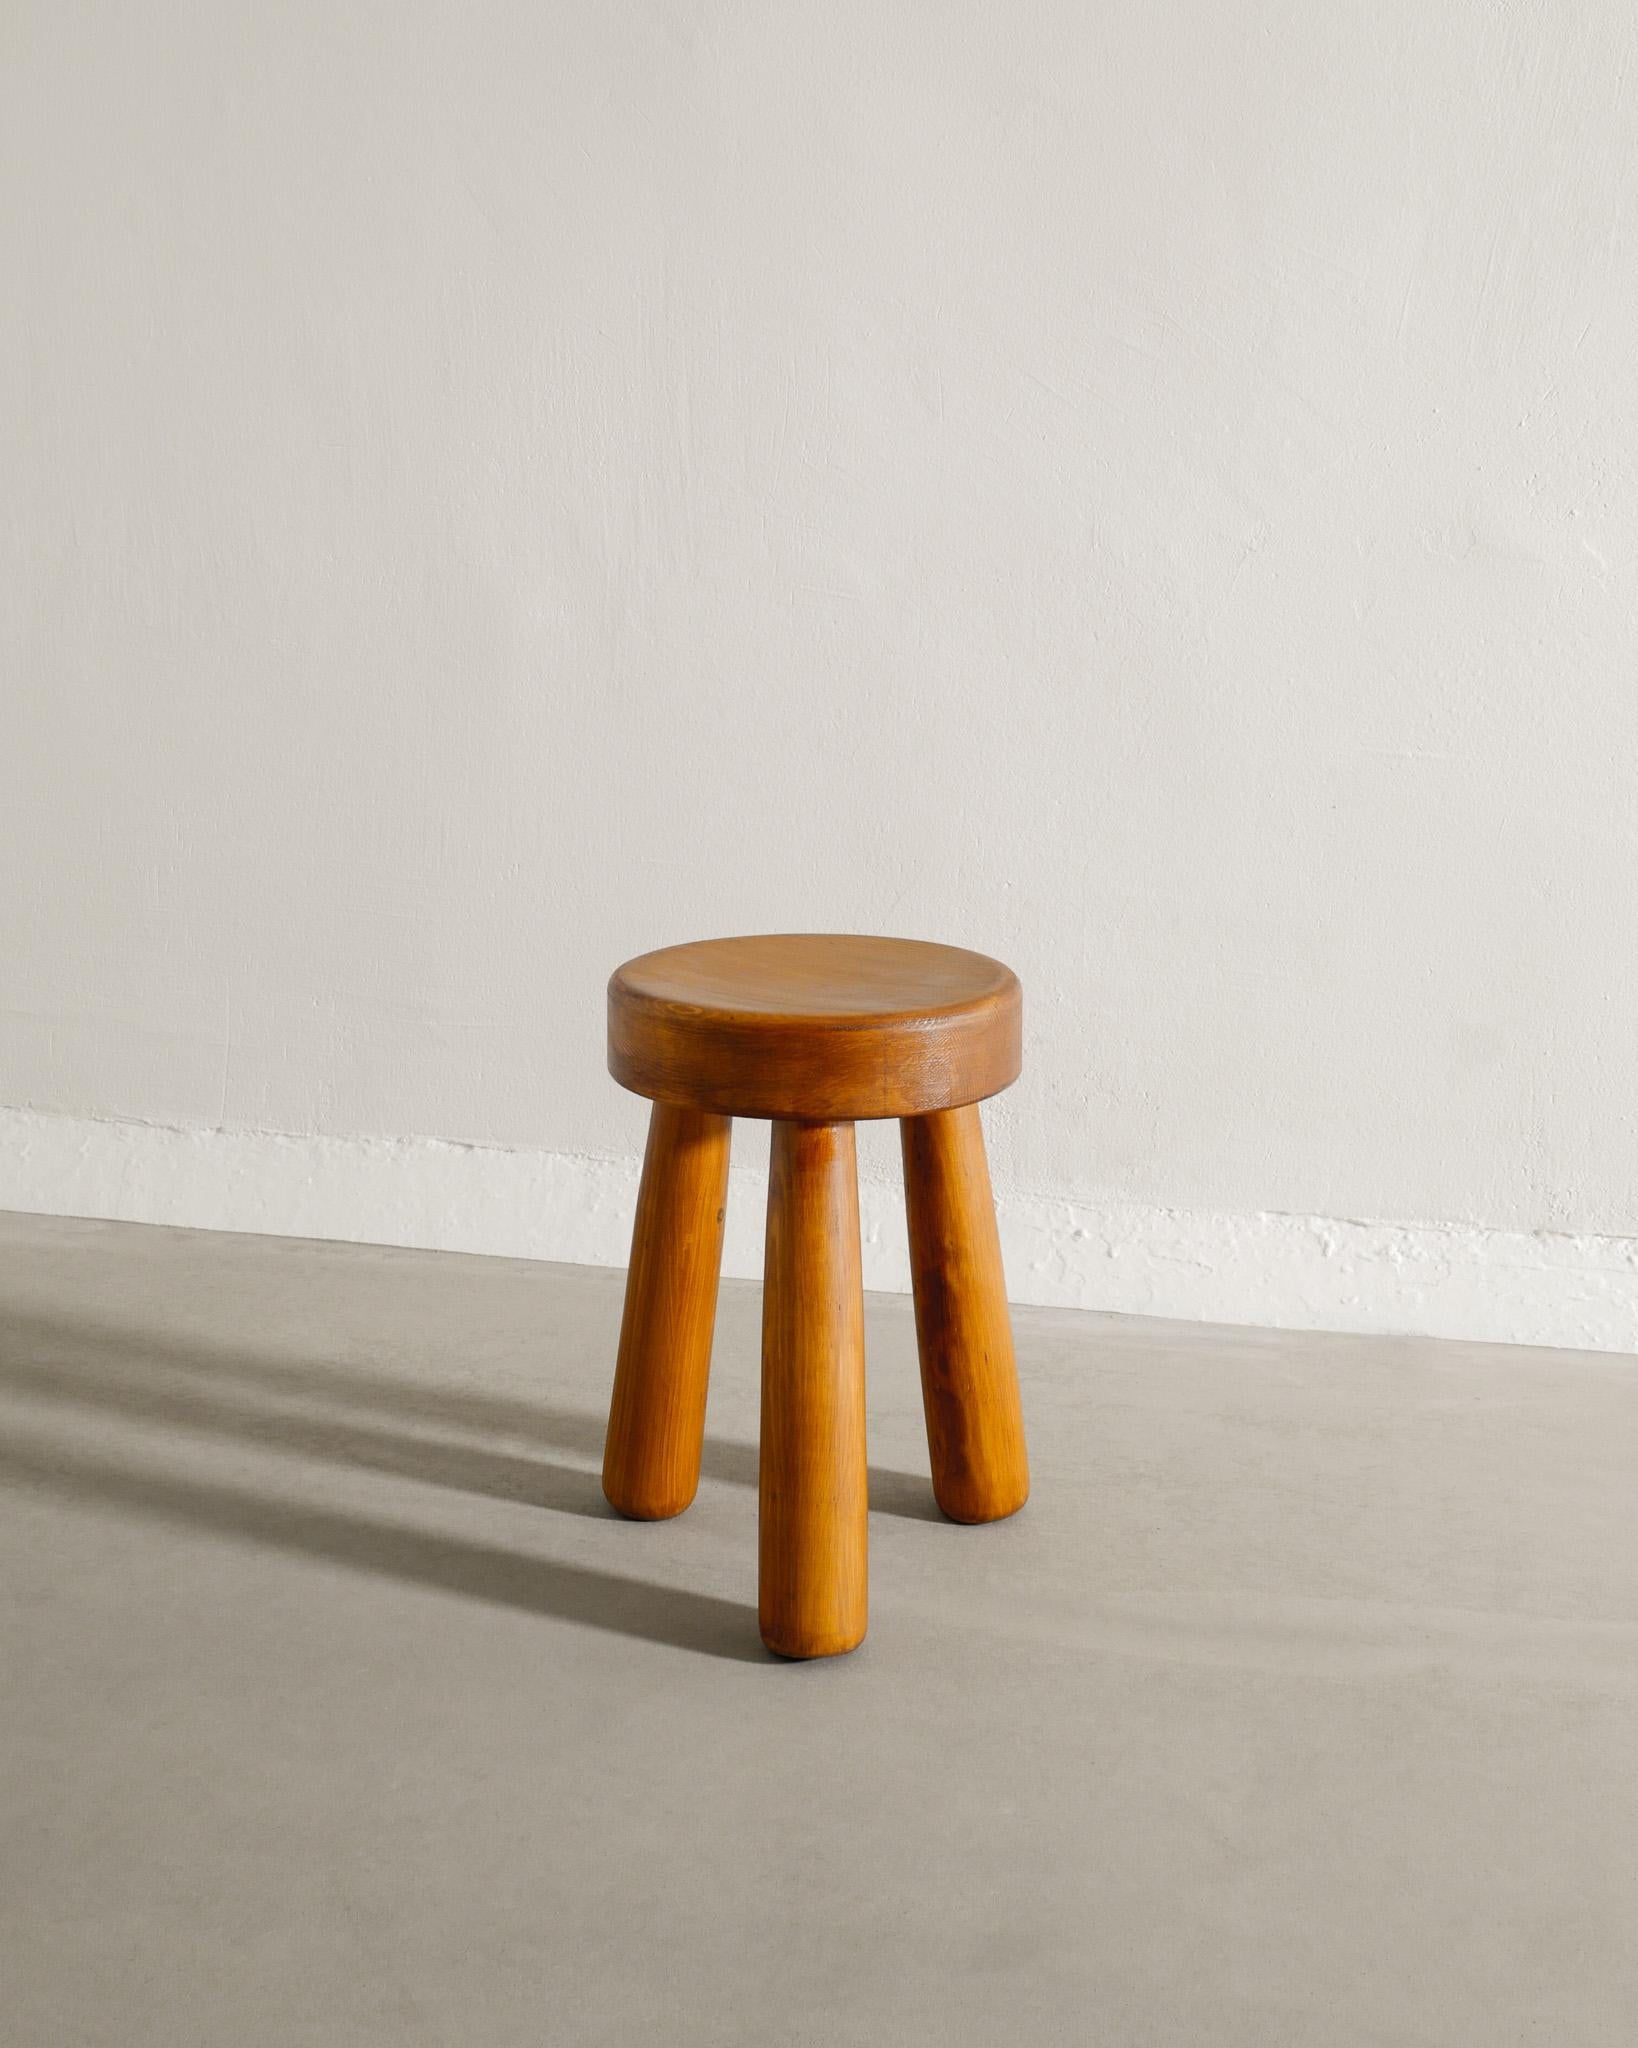 Rare and very nice wooden low tripod stool in stained pine produced by Bergsjö Sweden, 1990s. In good original condition. 

H: 33 cm / 13